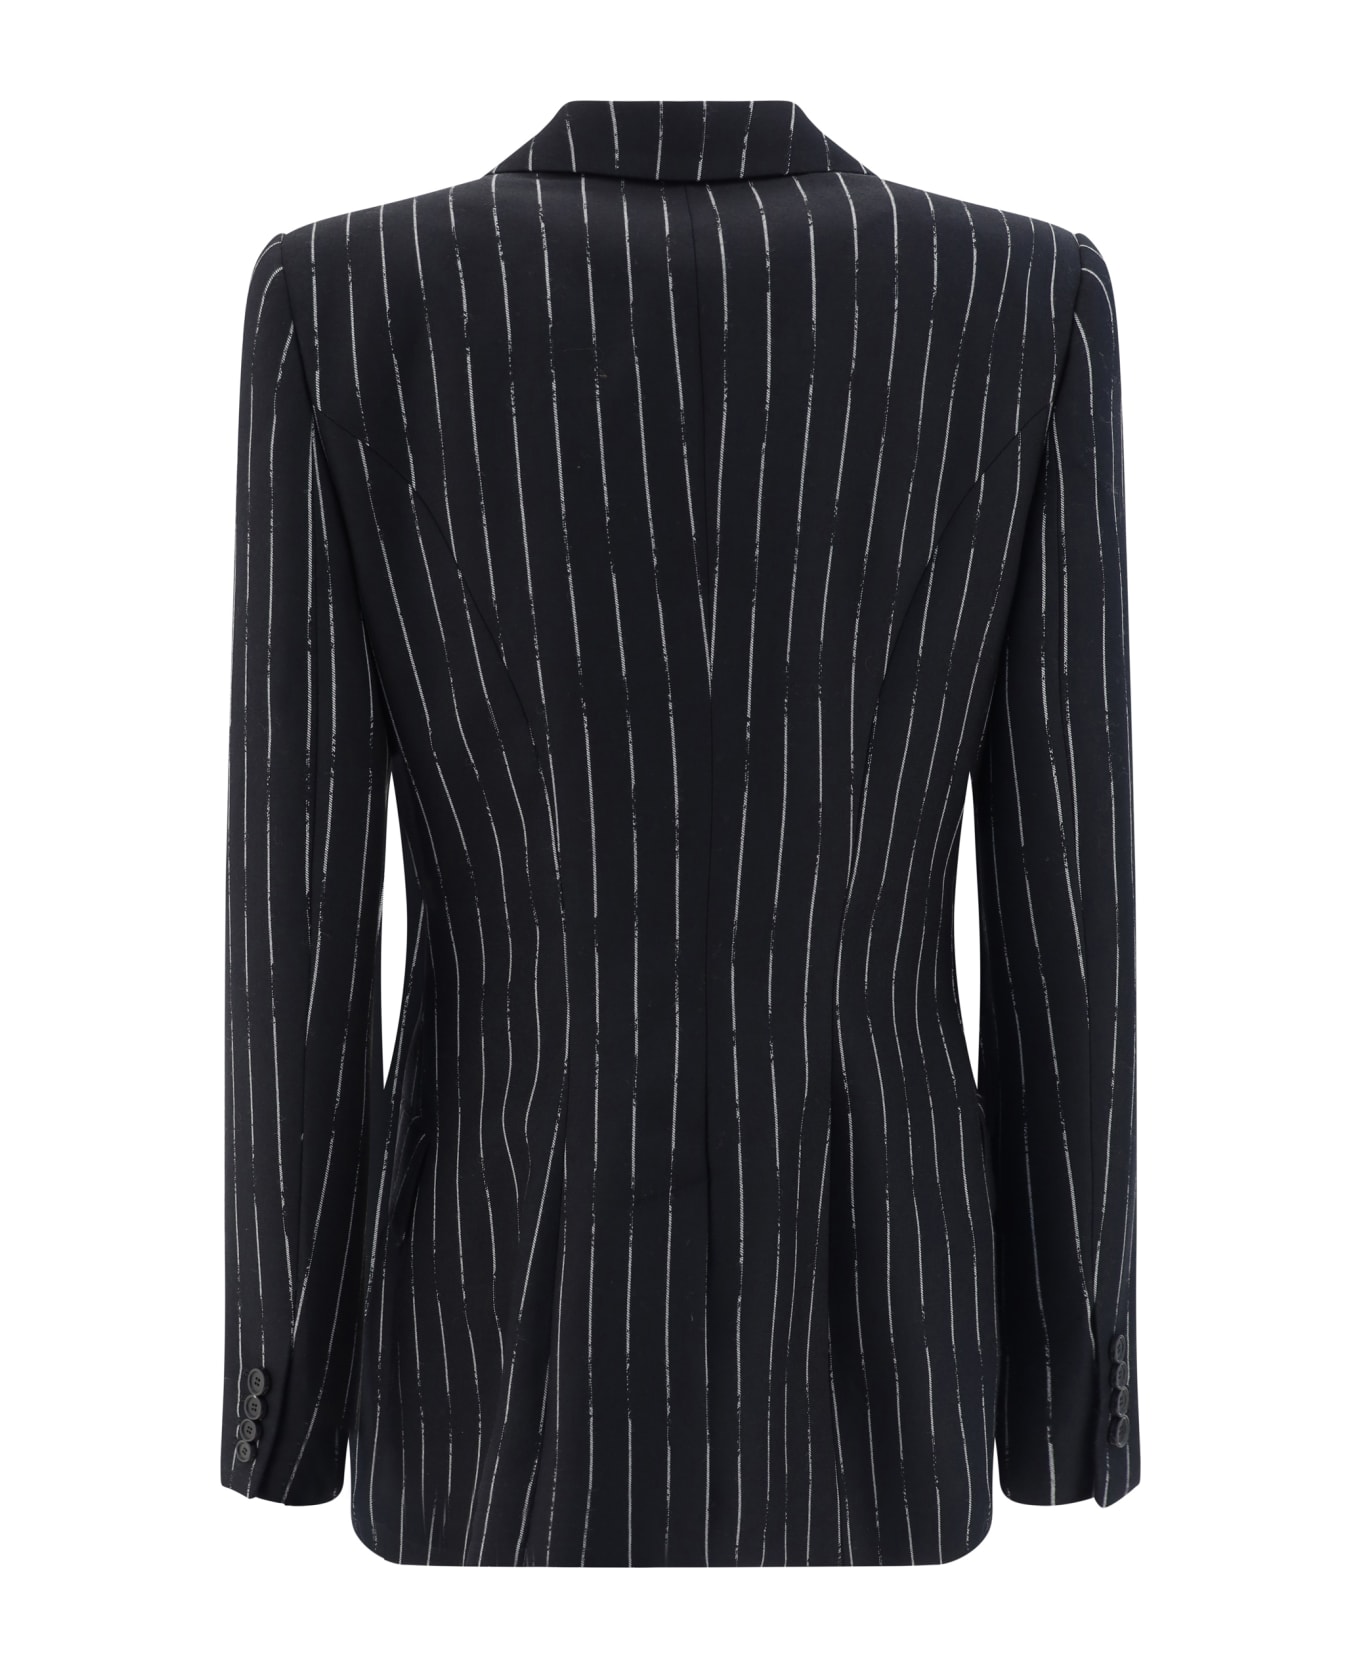 Alexander McQueen Double-breasted Blazer - Black/ivory ブレザー